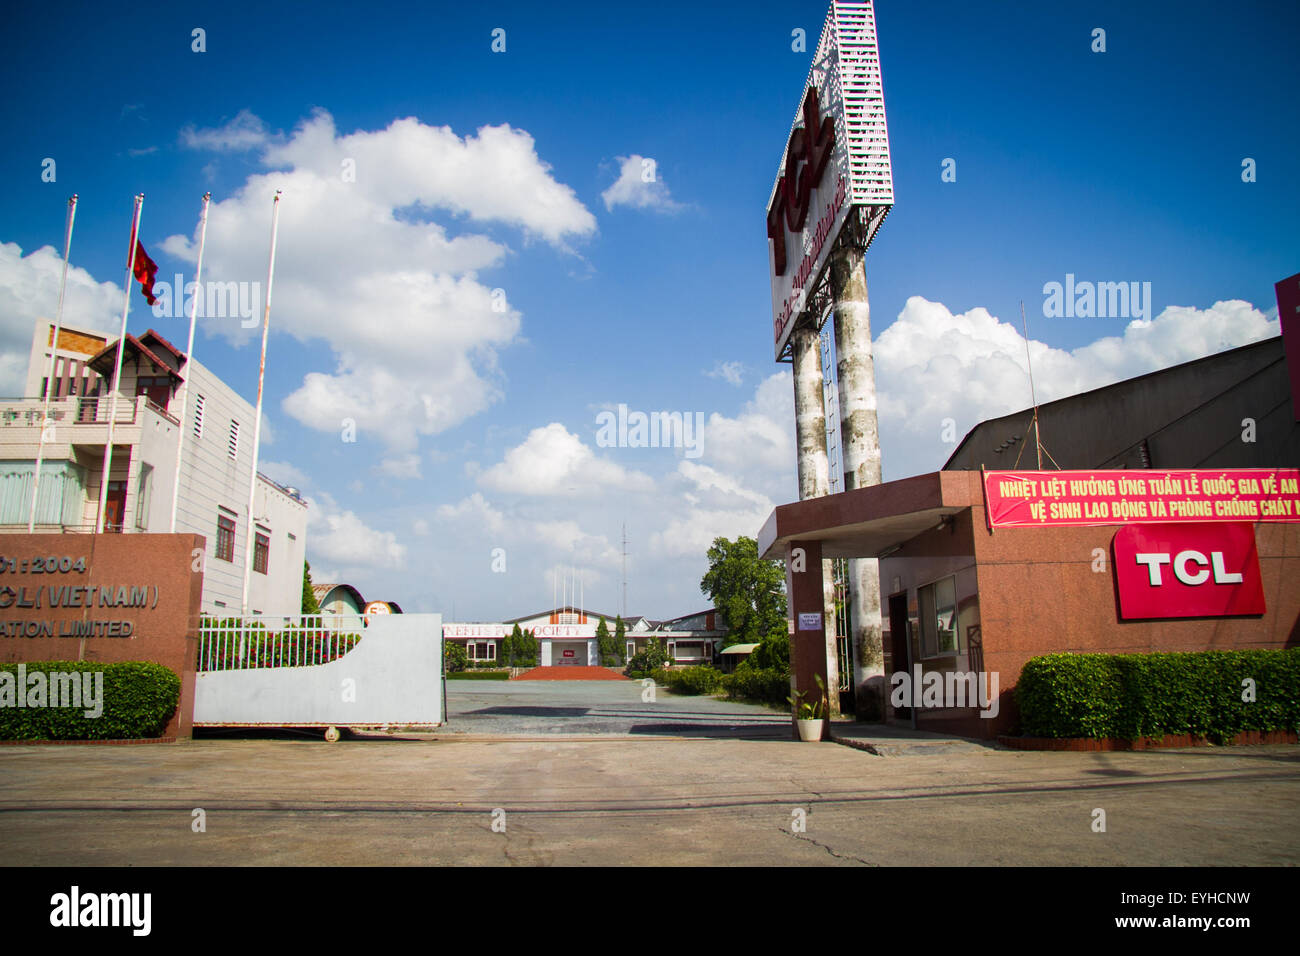 (150730) -- HO CHI MINH CITY, July 30, 2015 (Xinhua) -- File Photo taken on July 10, 2015 shows the site of the TCL Company Factory in Dong Nai province, Vietnam. To gain big market shares in the global market and the Vietnamese market in particular, Chinese electronics giant TCL has focused on all-round localization strategies to tap deeply into Vietnam's economy for joint development. Right after setting foot on Vietnamese soil in 1999, TCL set targets of developing its own brands, distribution networks and technologies. Now, TCL Vietnam has over 200 authorized dealers and distribution netwo Stock Photo